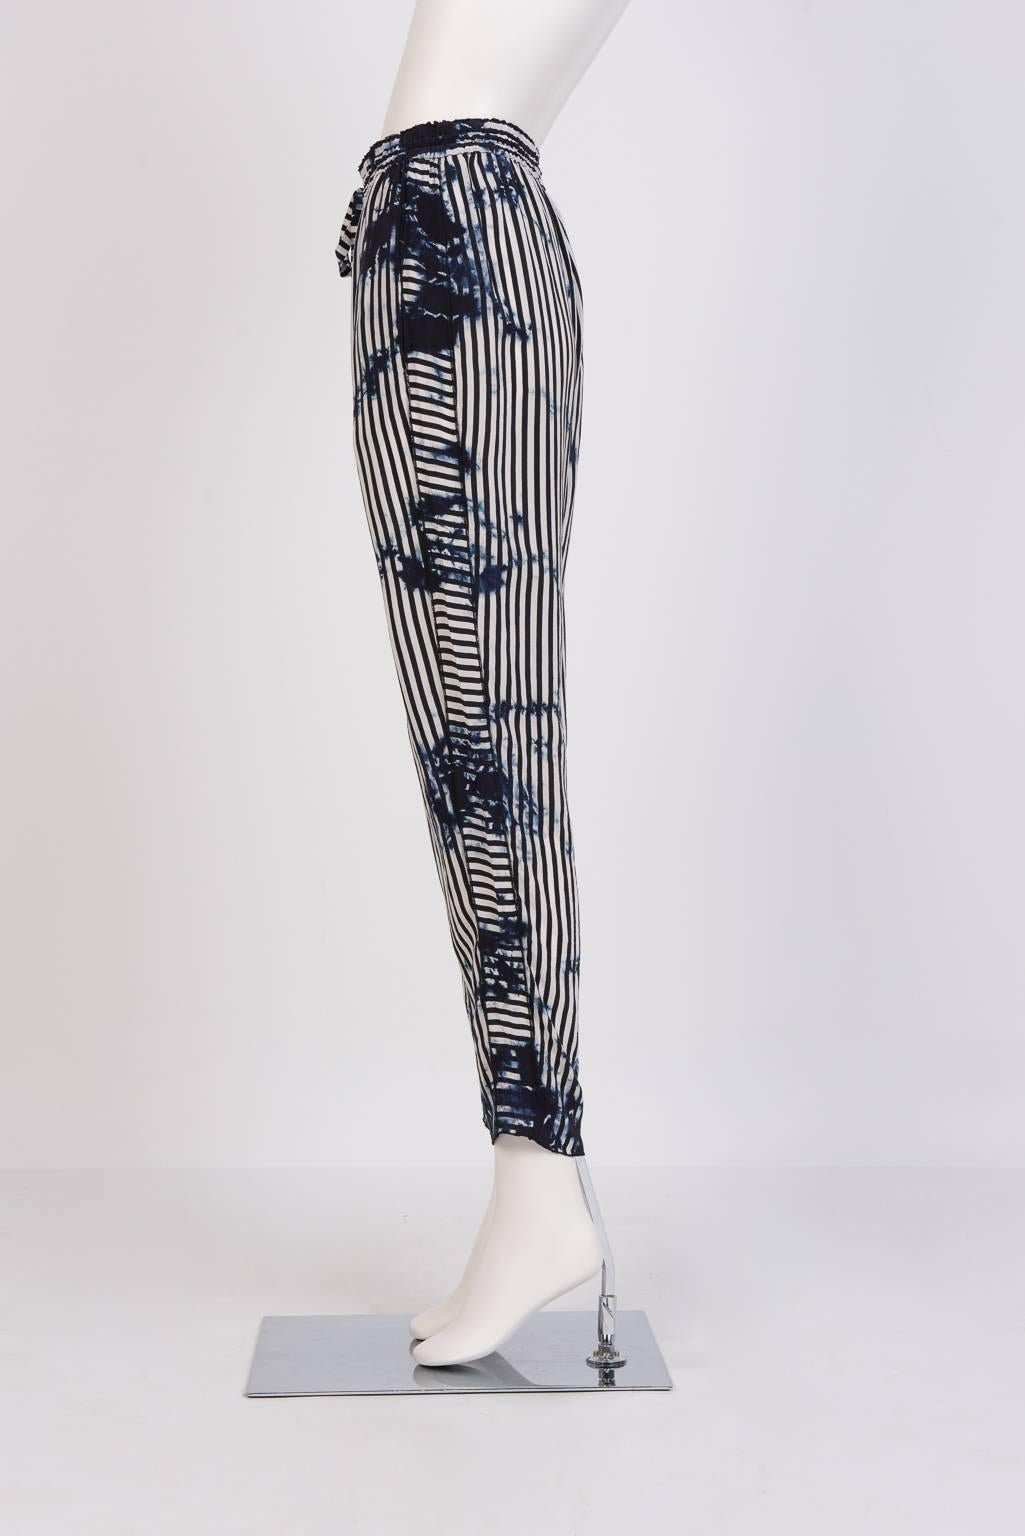 Black Raquel Allegra Tie-Dyed Drawstring Trousers For Sale